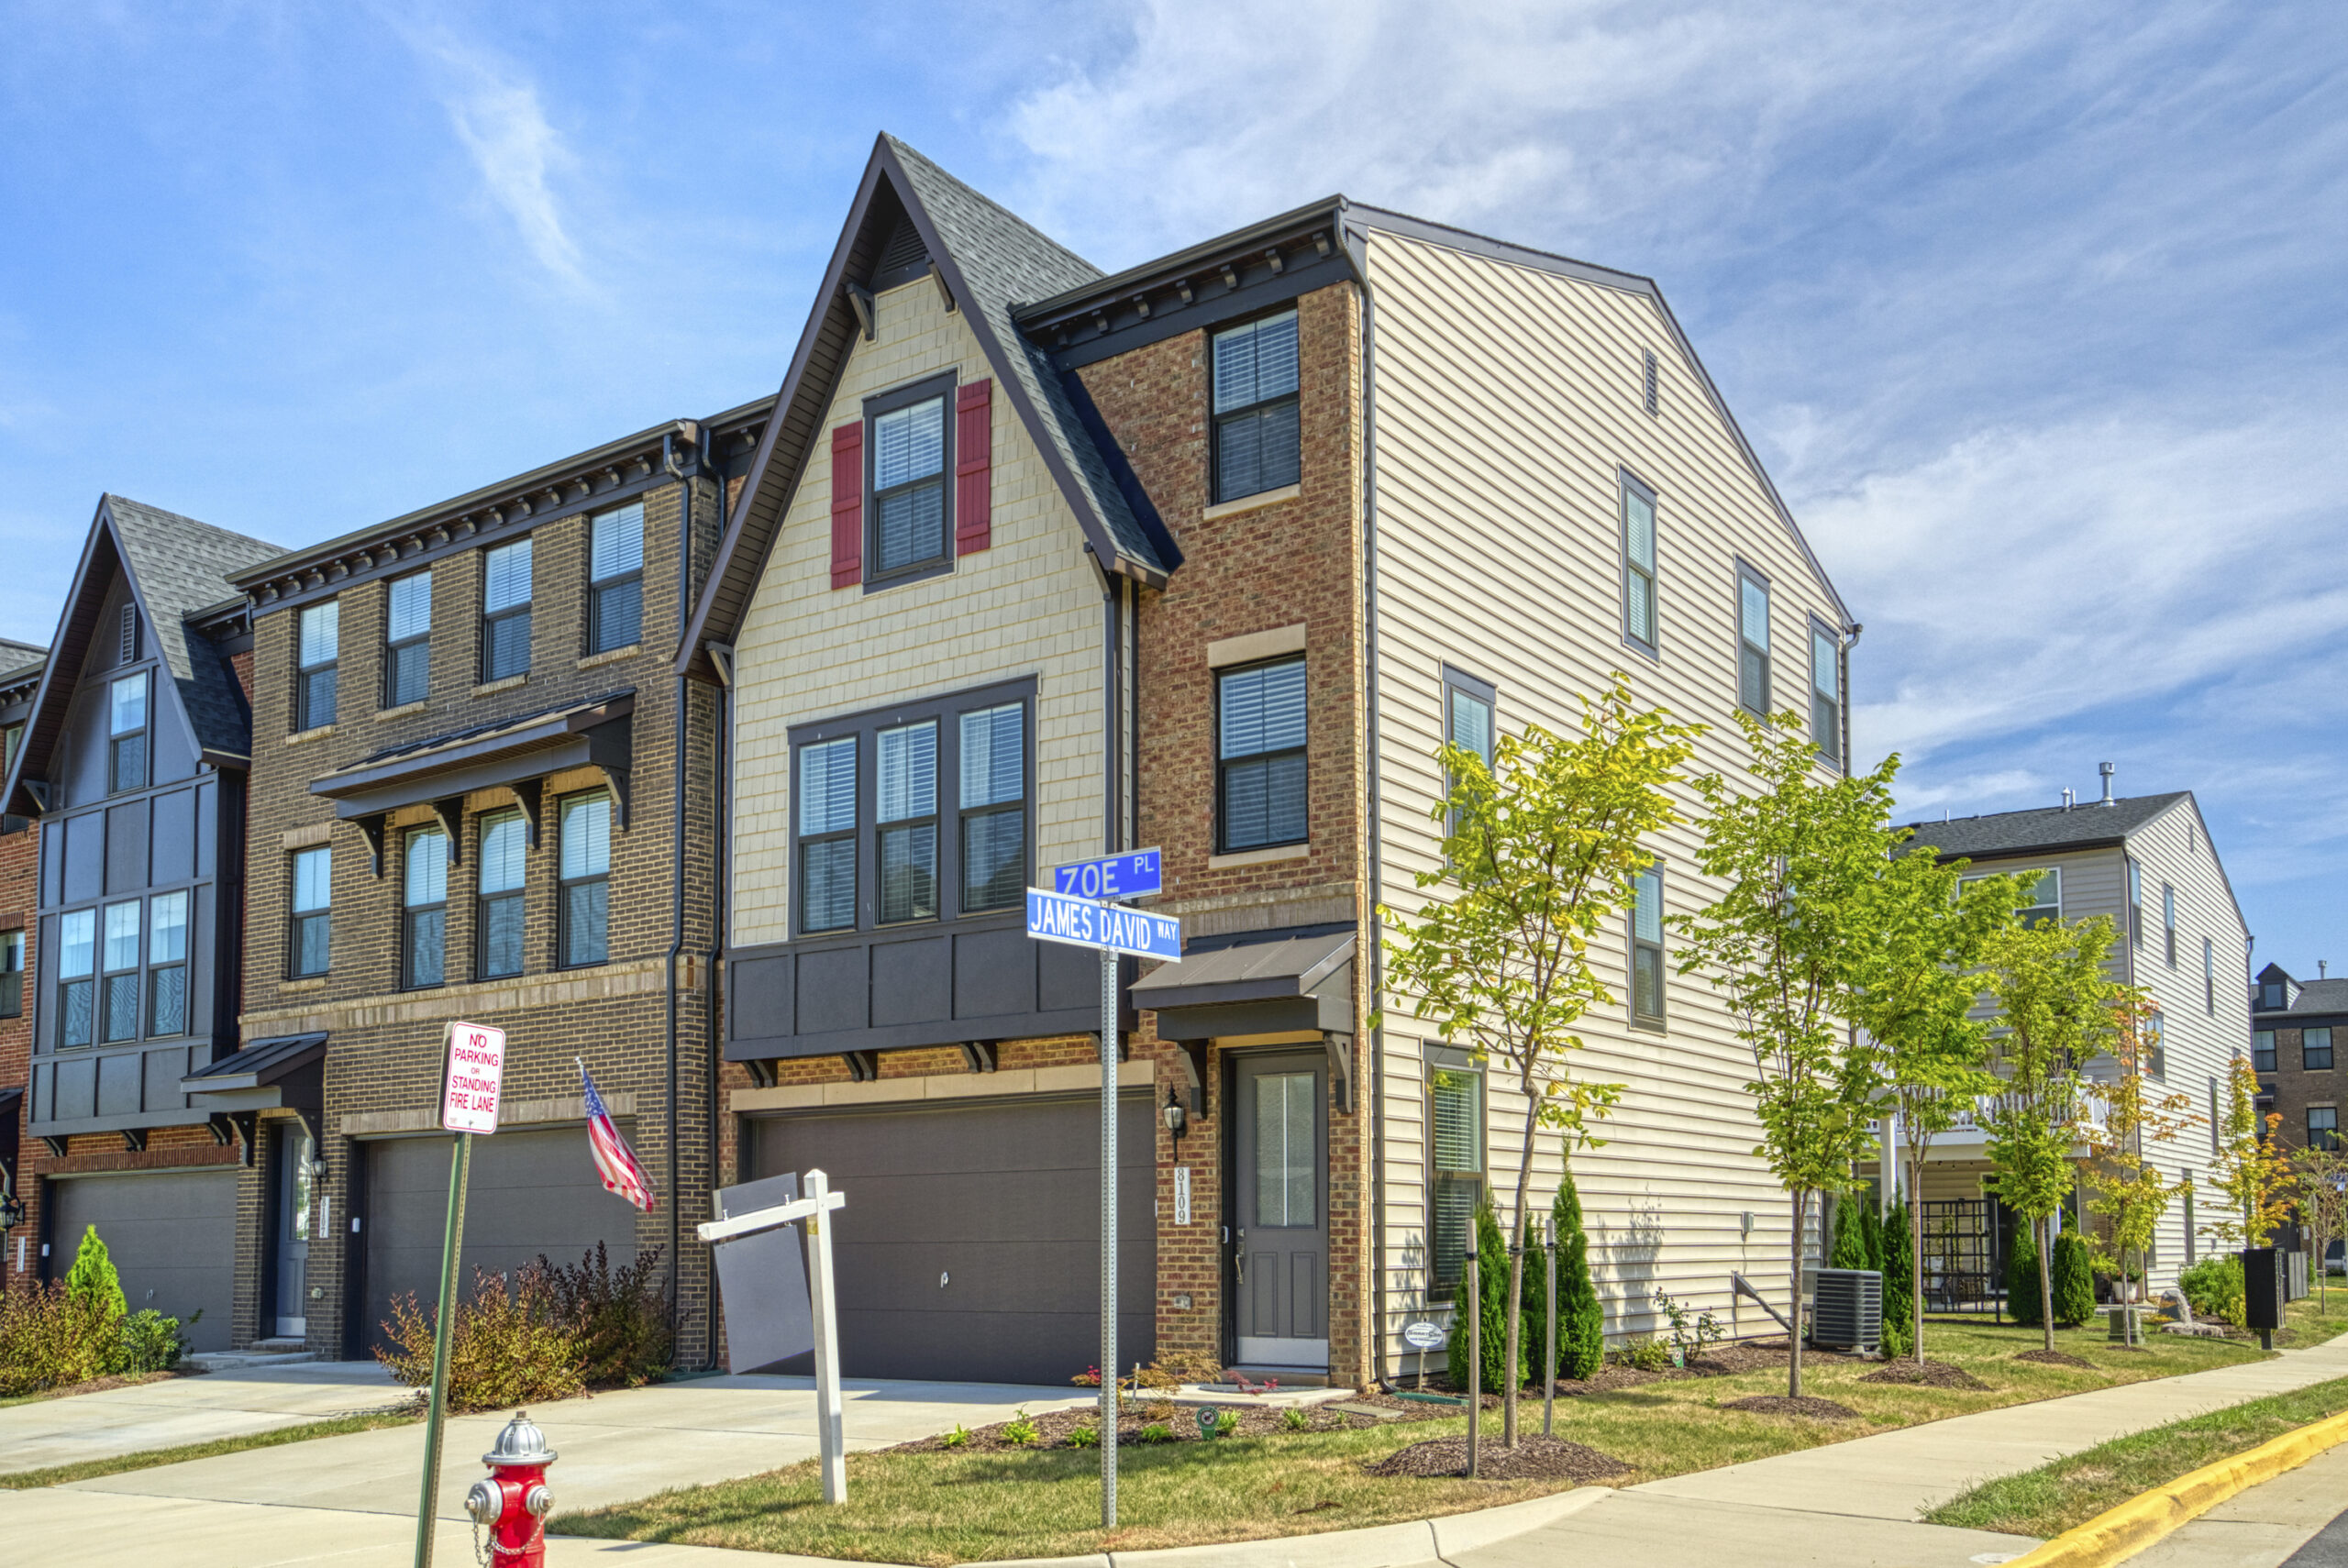 Professional exterior photo of 8109 Zoe Place, Alexandria, VA - Showing the front of the end-unit townhome with 2 car garage, brick and cream vinyl siding